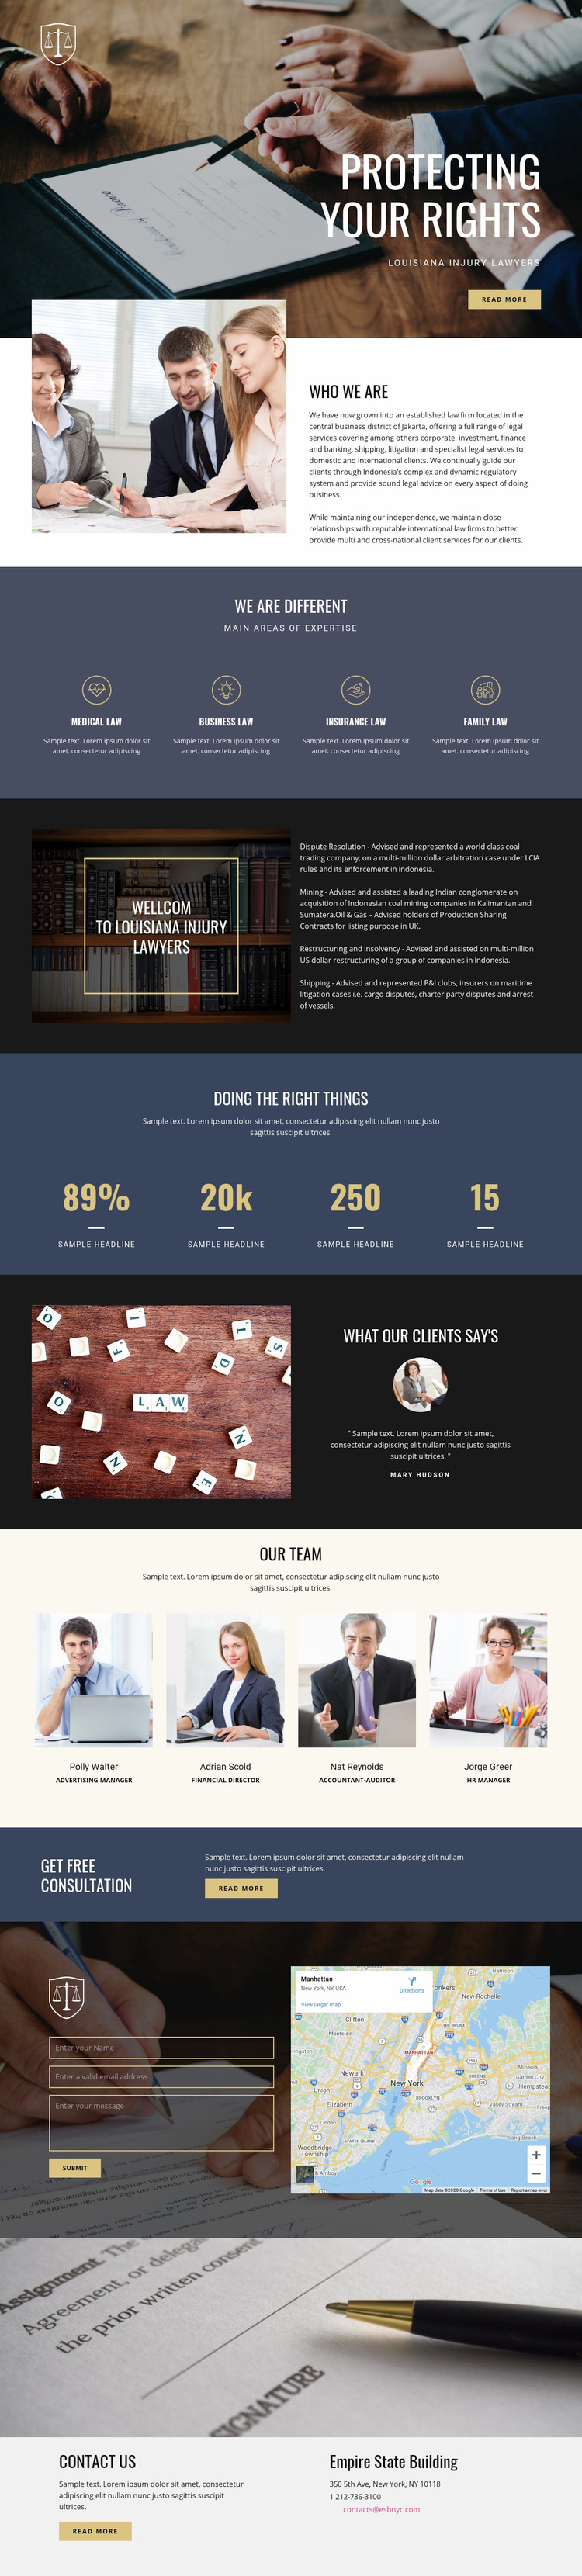 Protecting your rights  Squarespace Template Alternative